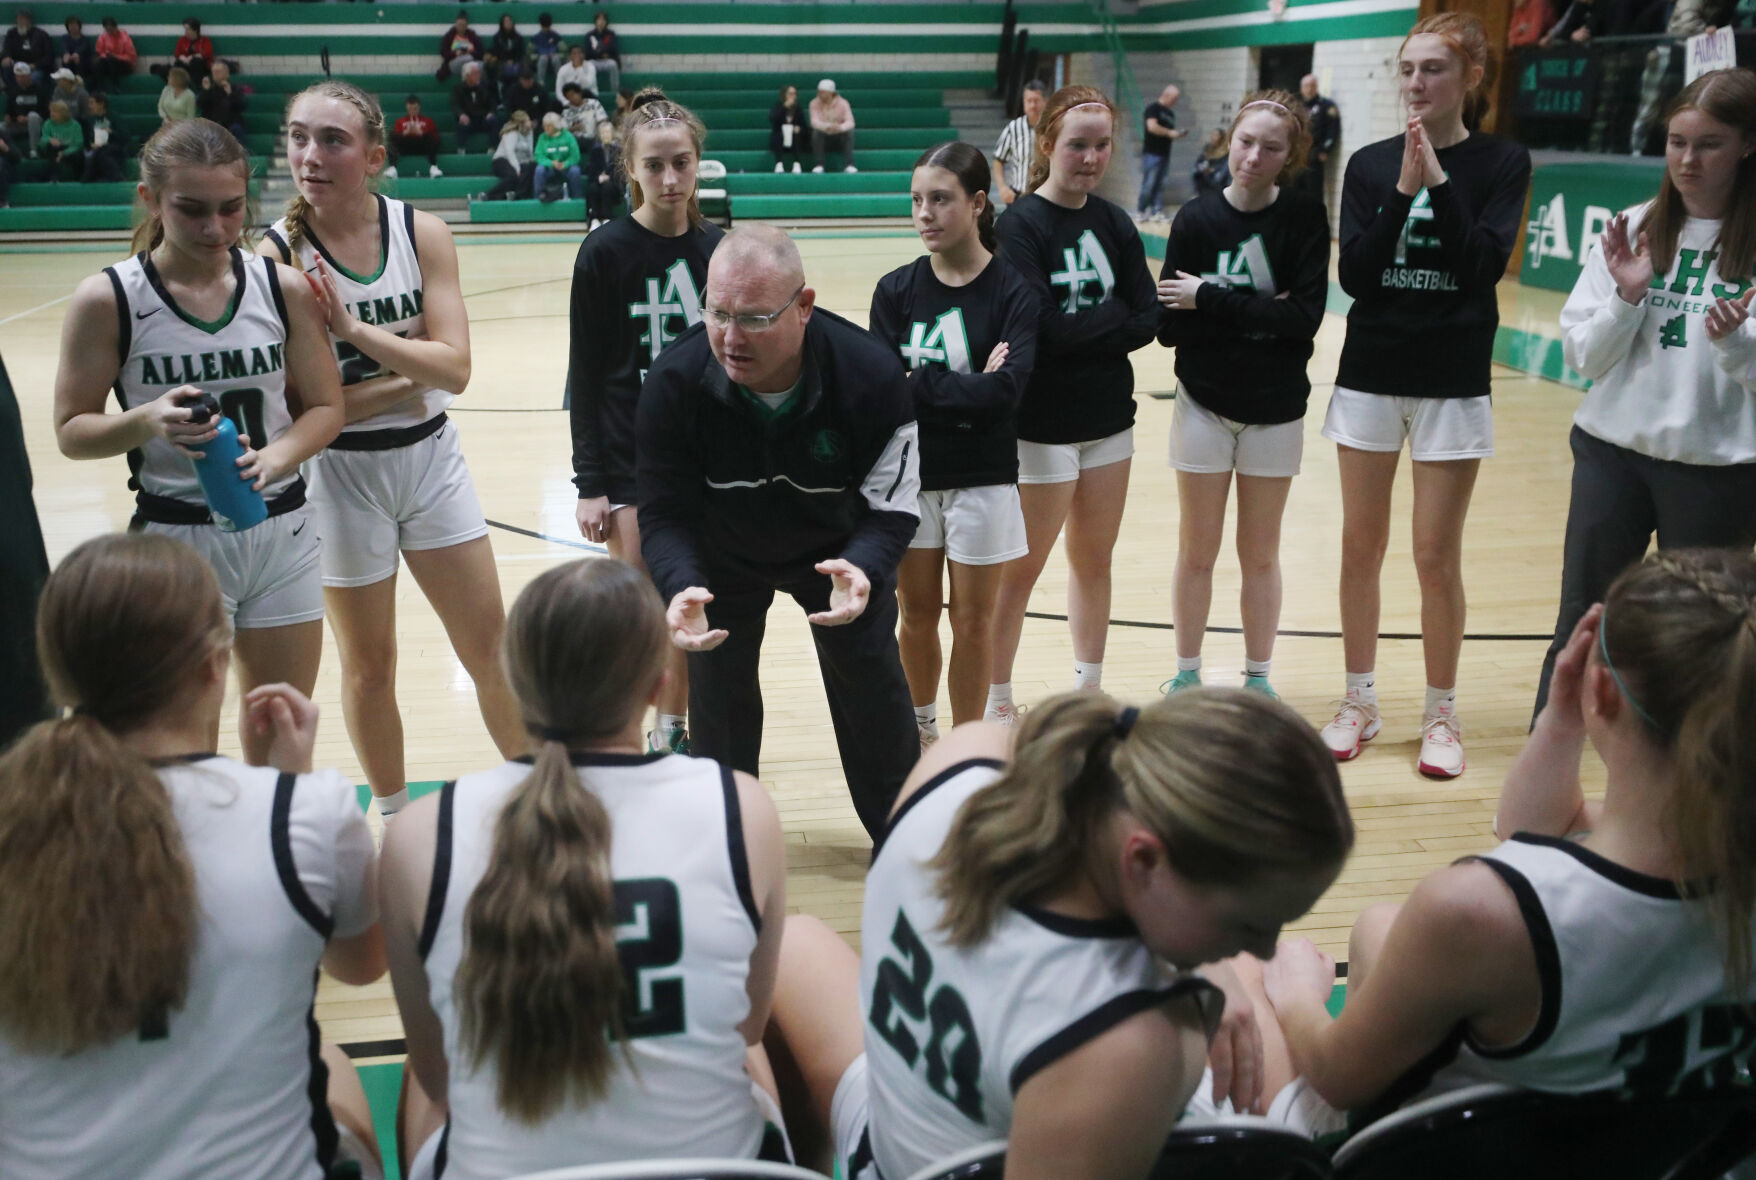 Alleman’s Coach Steve Ford Achieves 400th Win Against Former Team with Game-High Performance by Clair Hulke